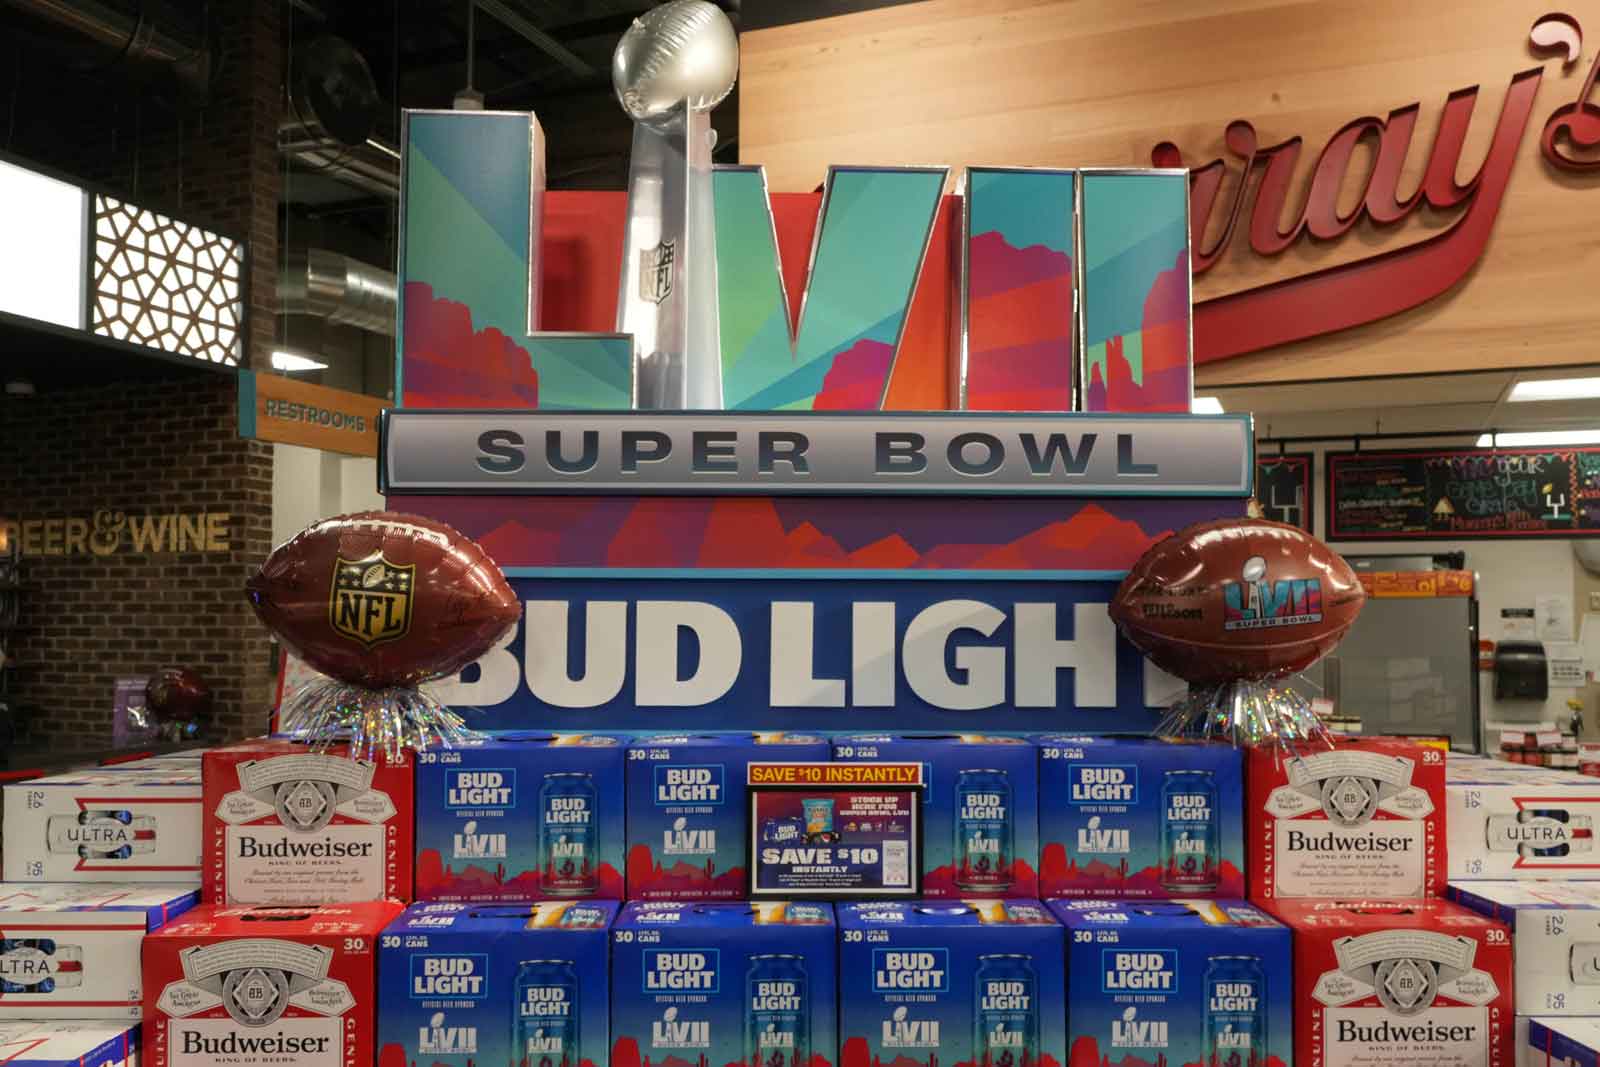 Super Bowl LVII resale: What are the ticket prices?